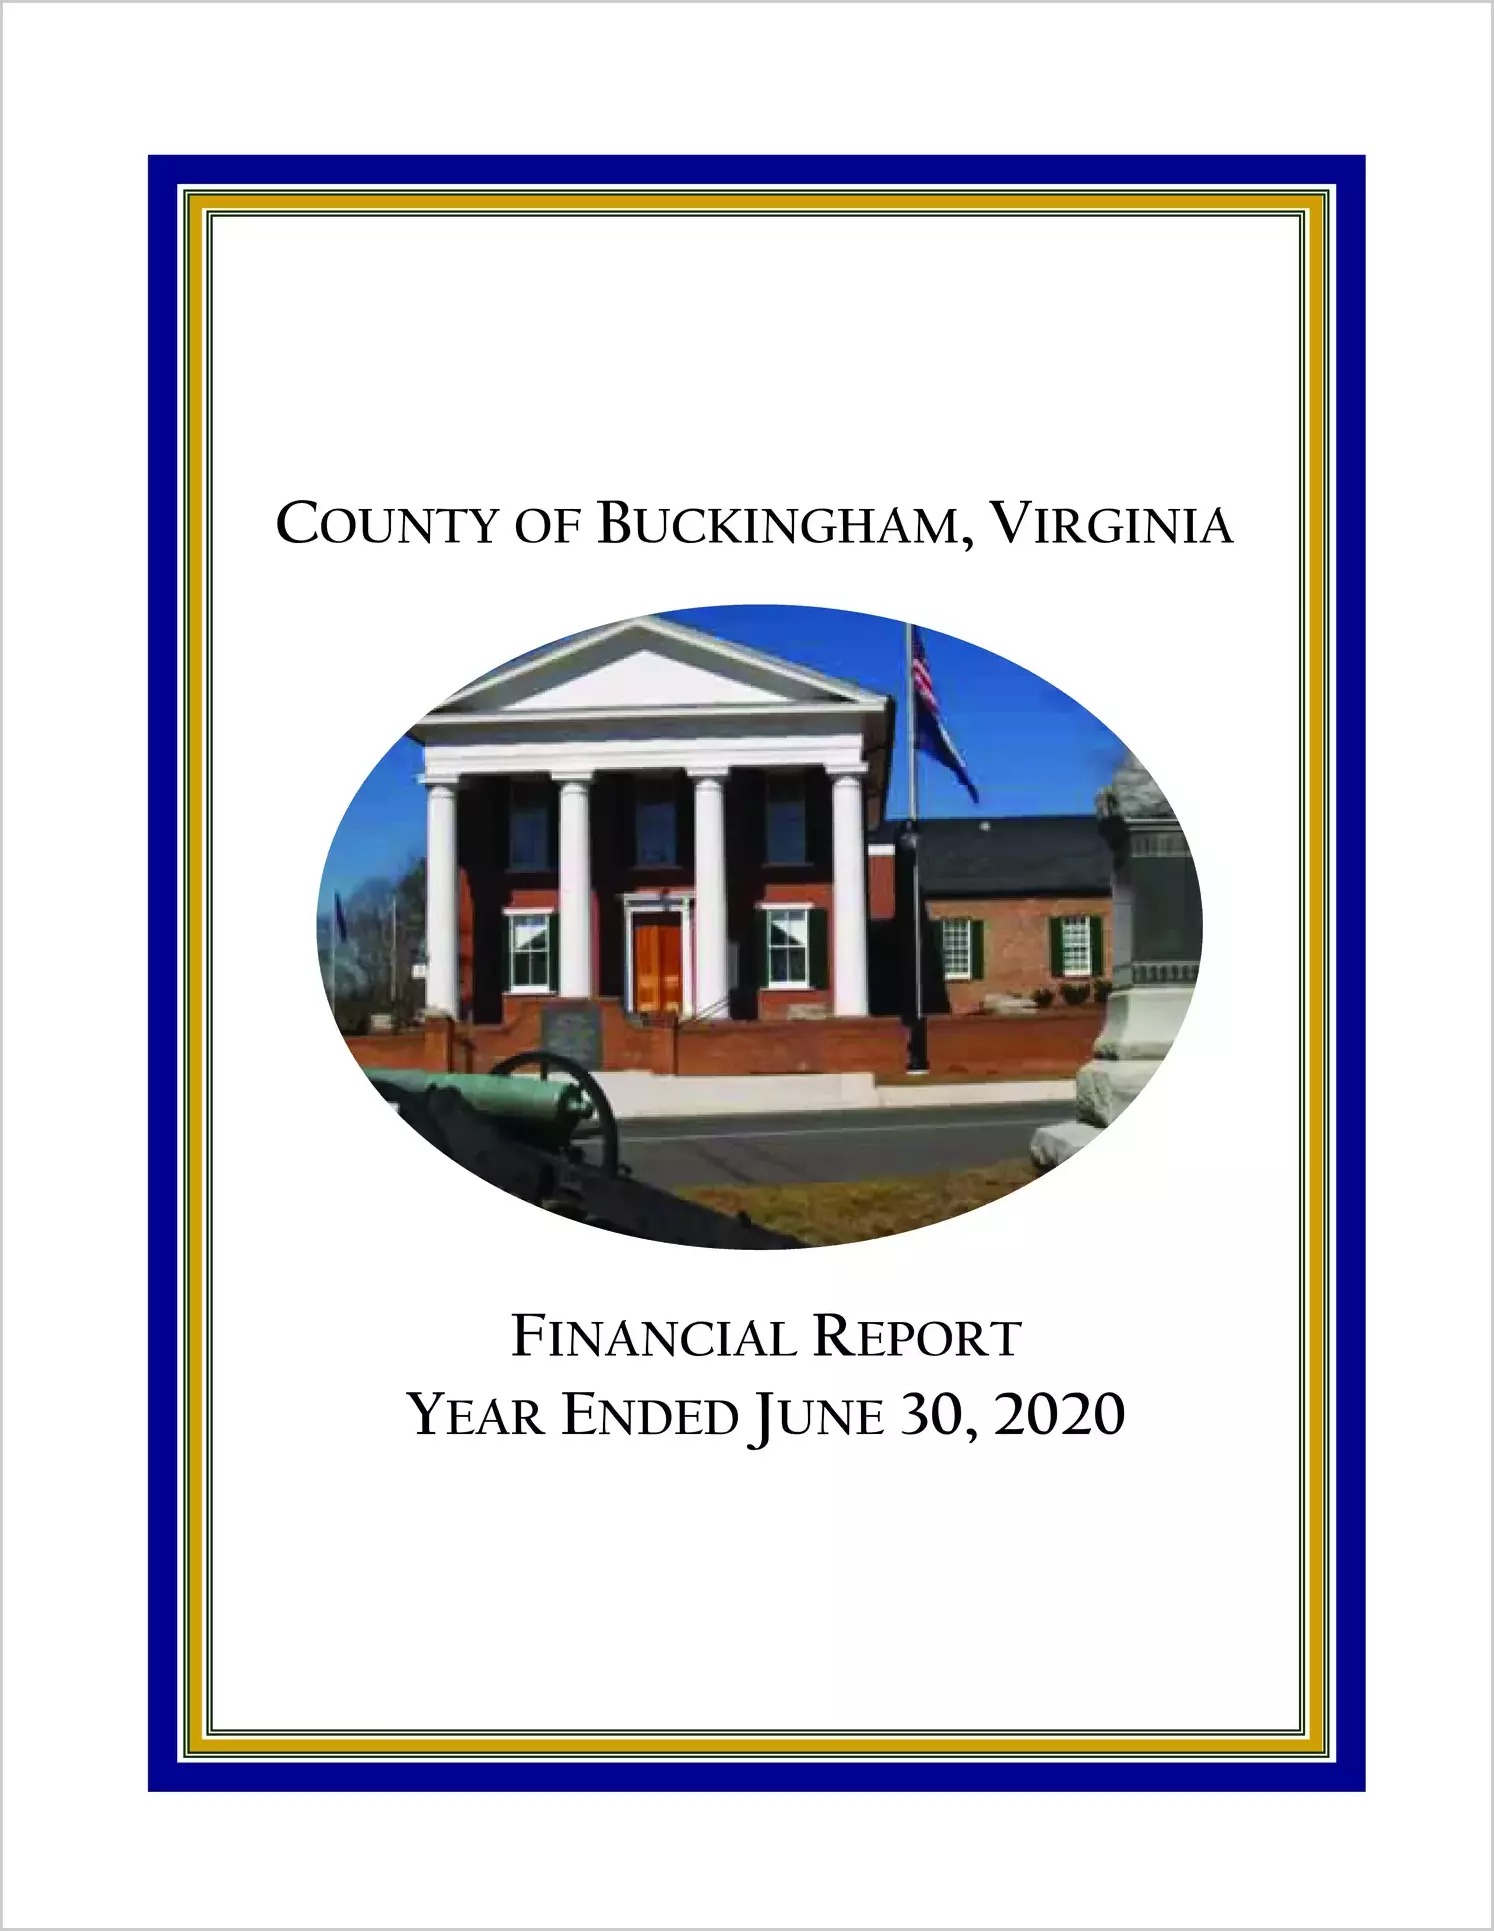 2020 Annual Financial Report for County of Buckingham